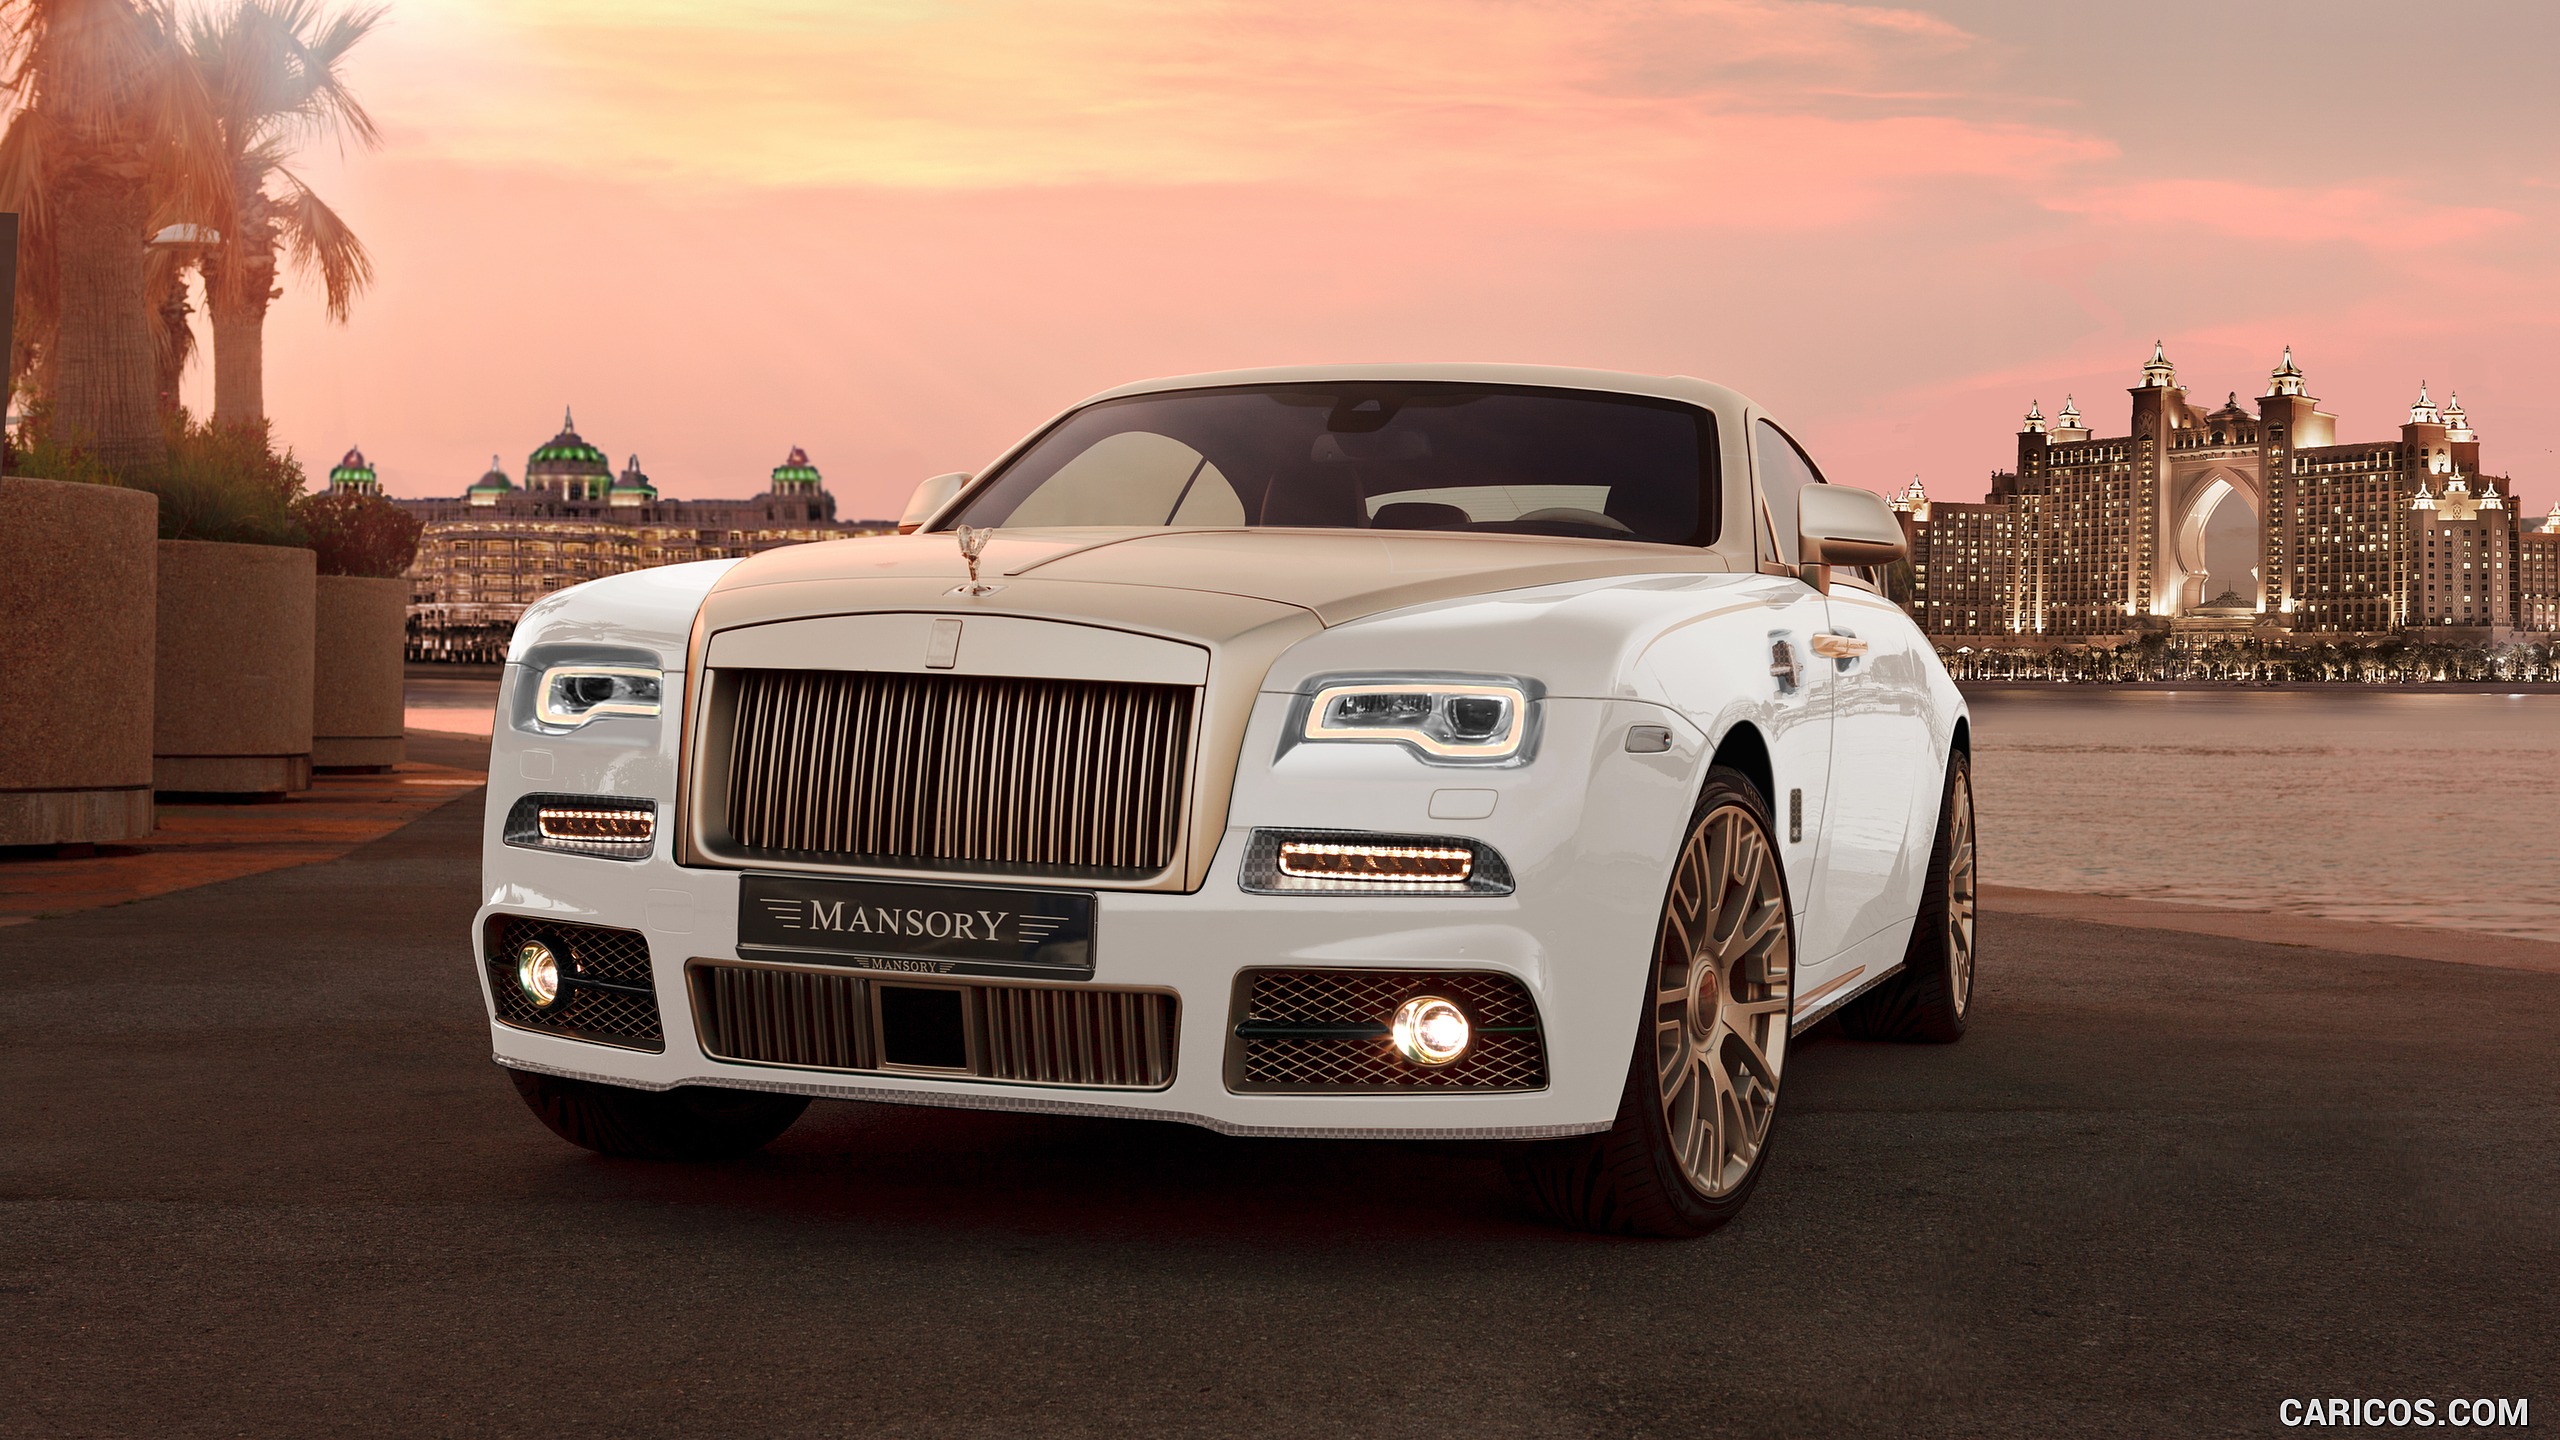 2016 MANSORY Rolls-Royce Wraith Palm Edition 999 - Front, #1 of 10